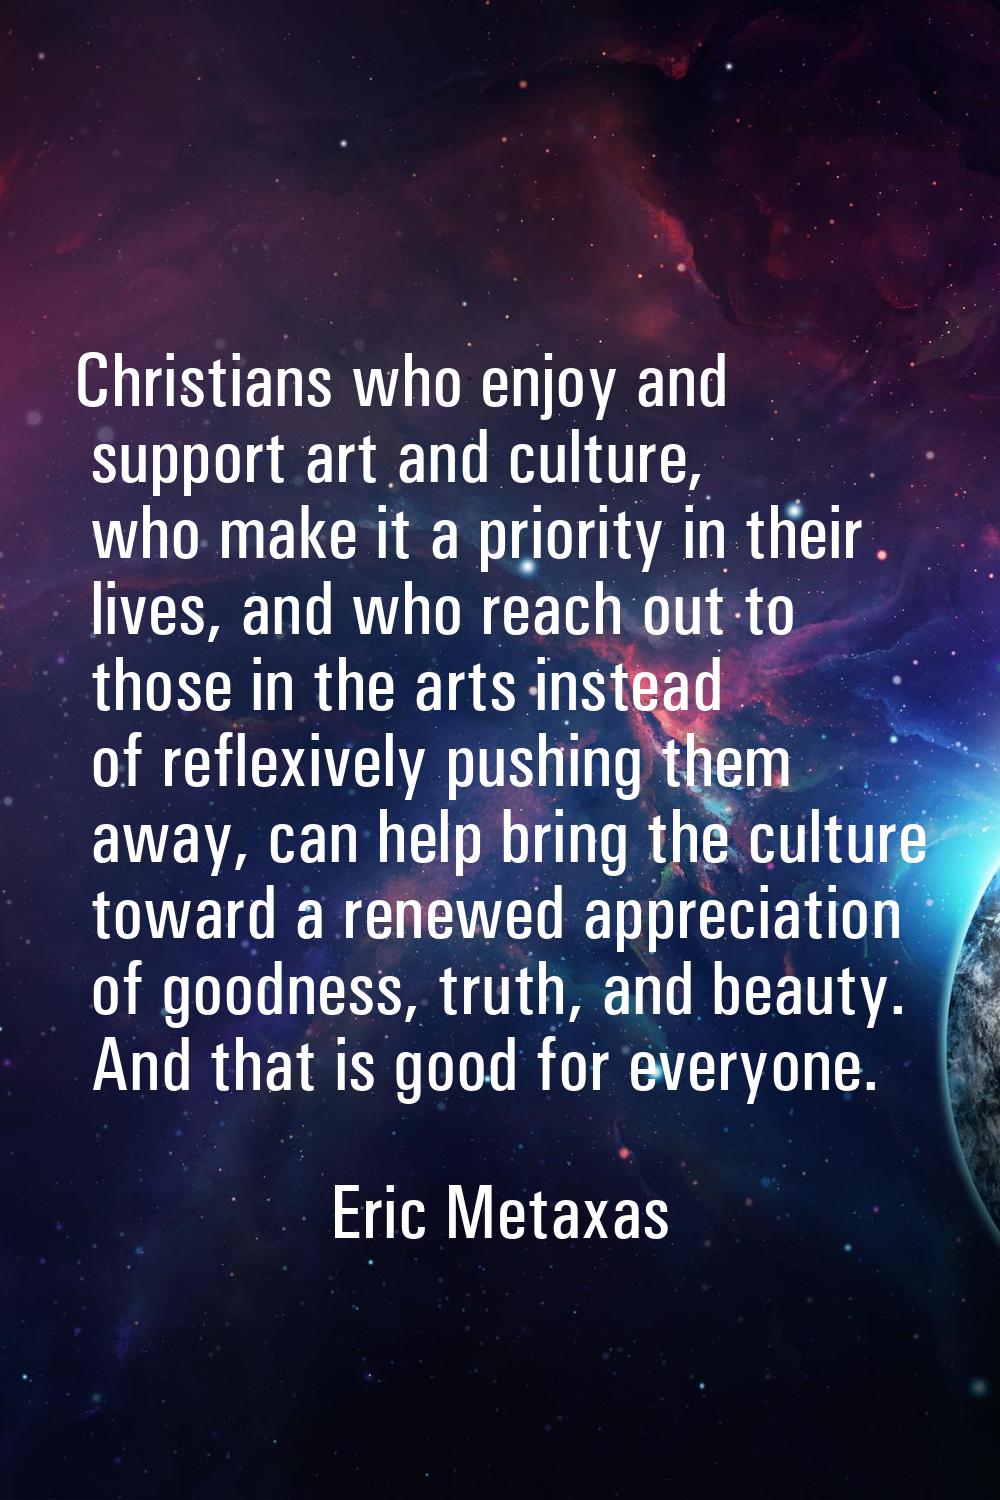 Christians who enjoy and support art and culture, who make it a priority in their lives, and who re